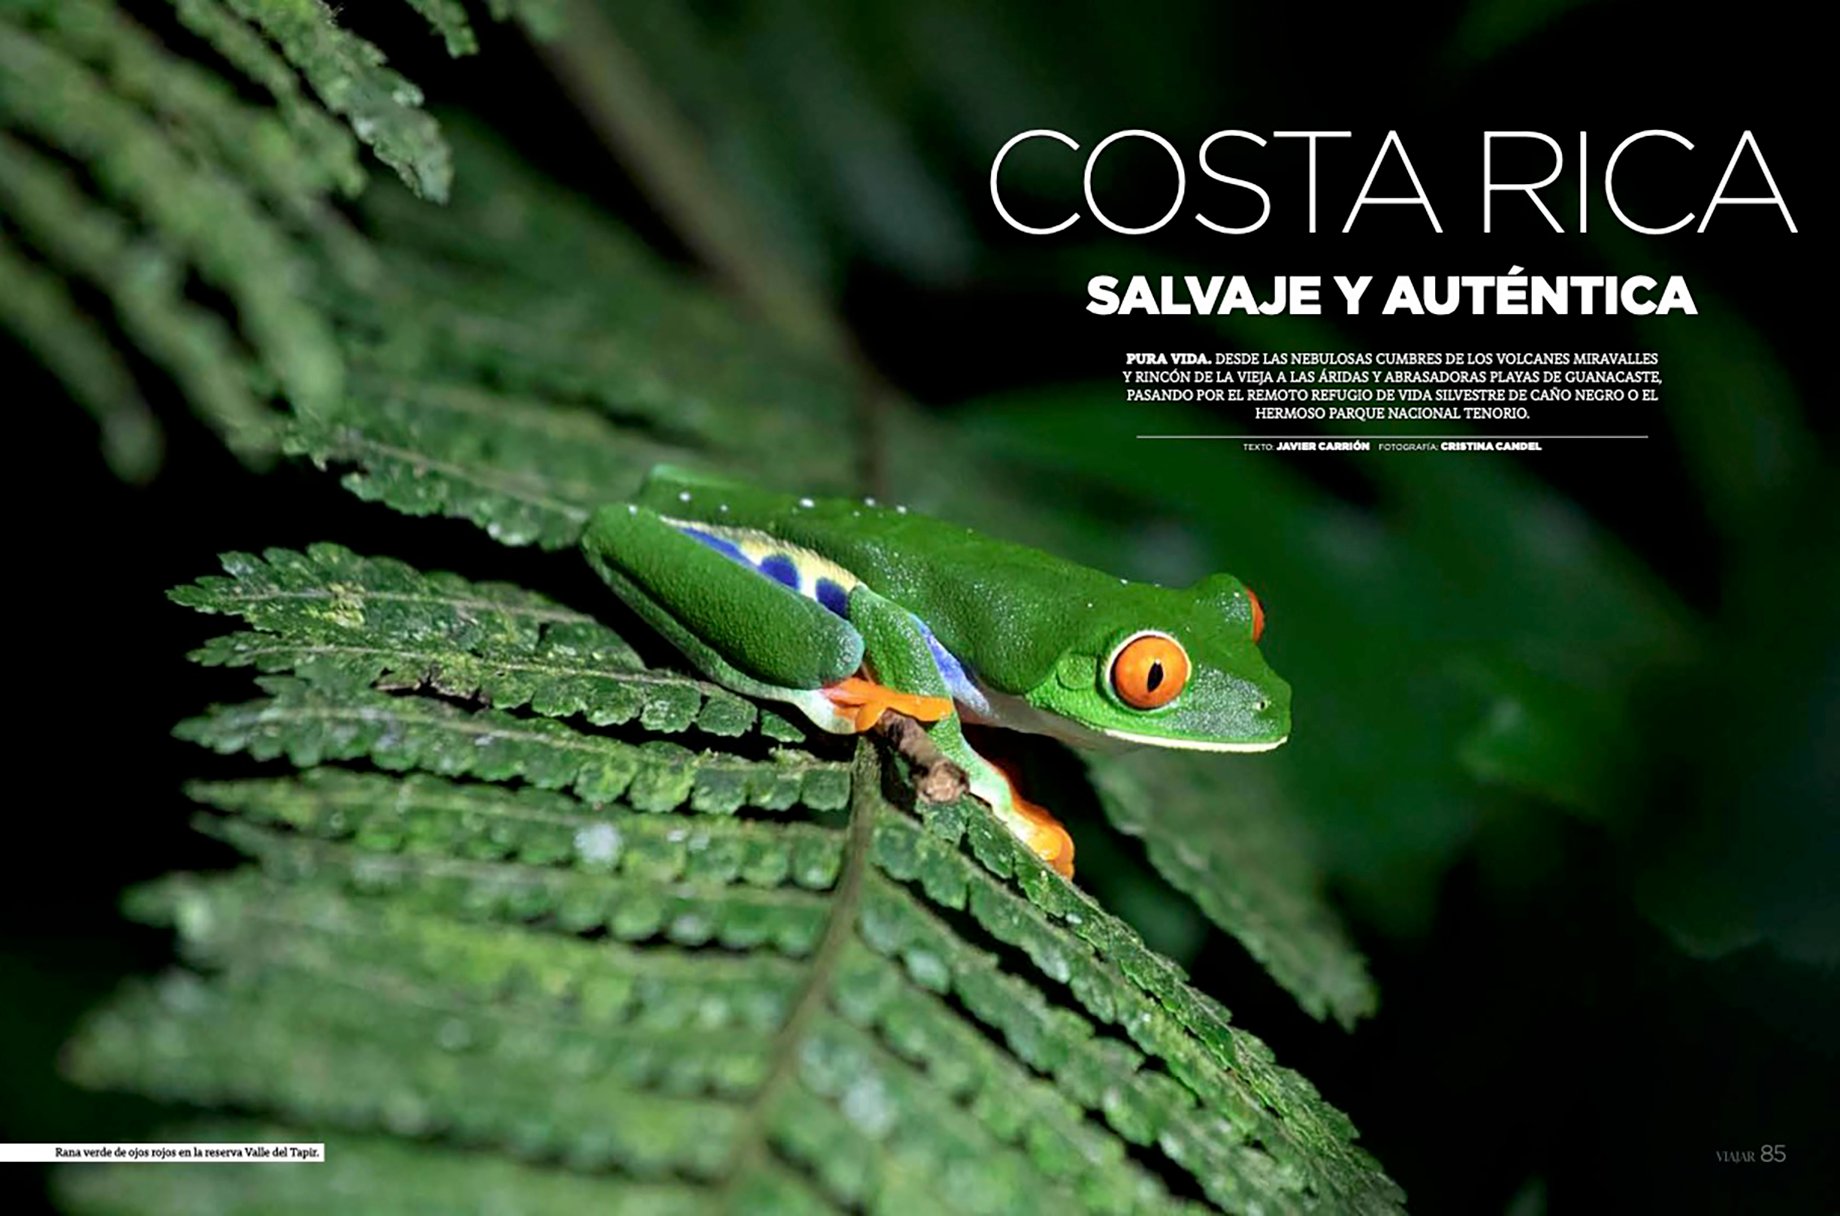 Tear sheet of Viajar magazine feature on Costa Rica shot by Cristina Candel